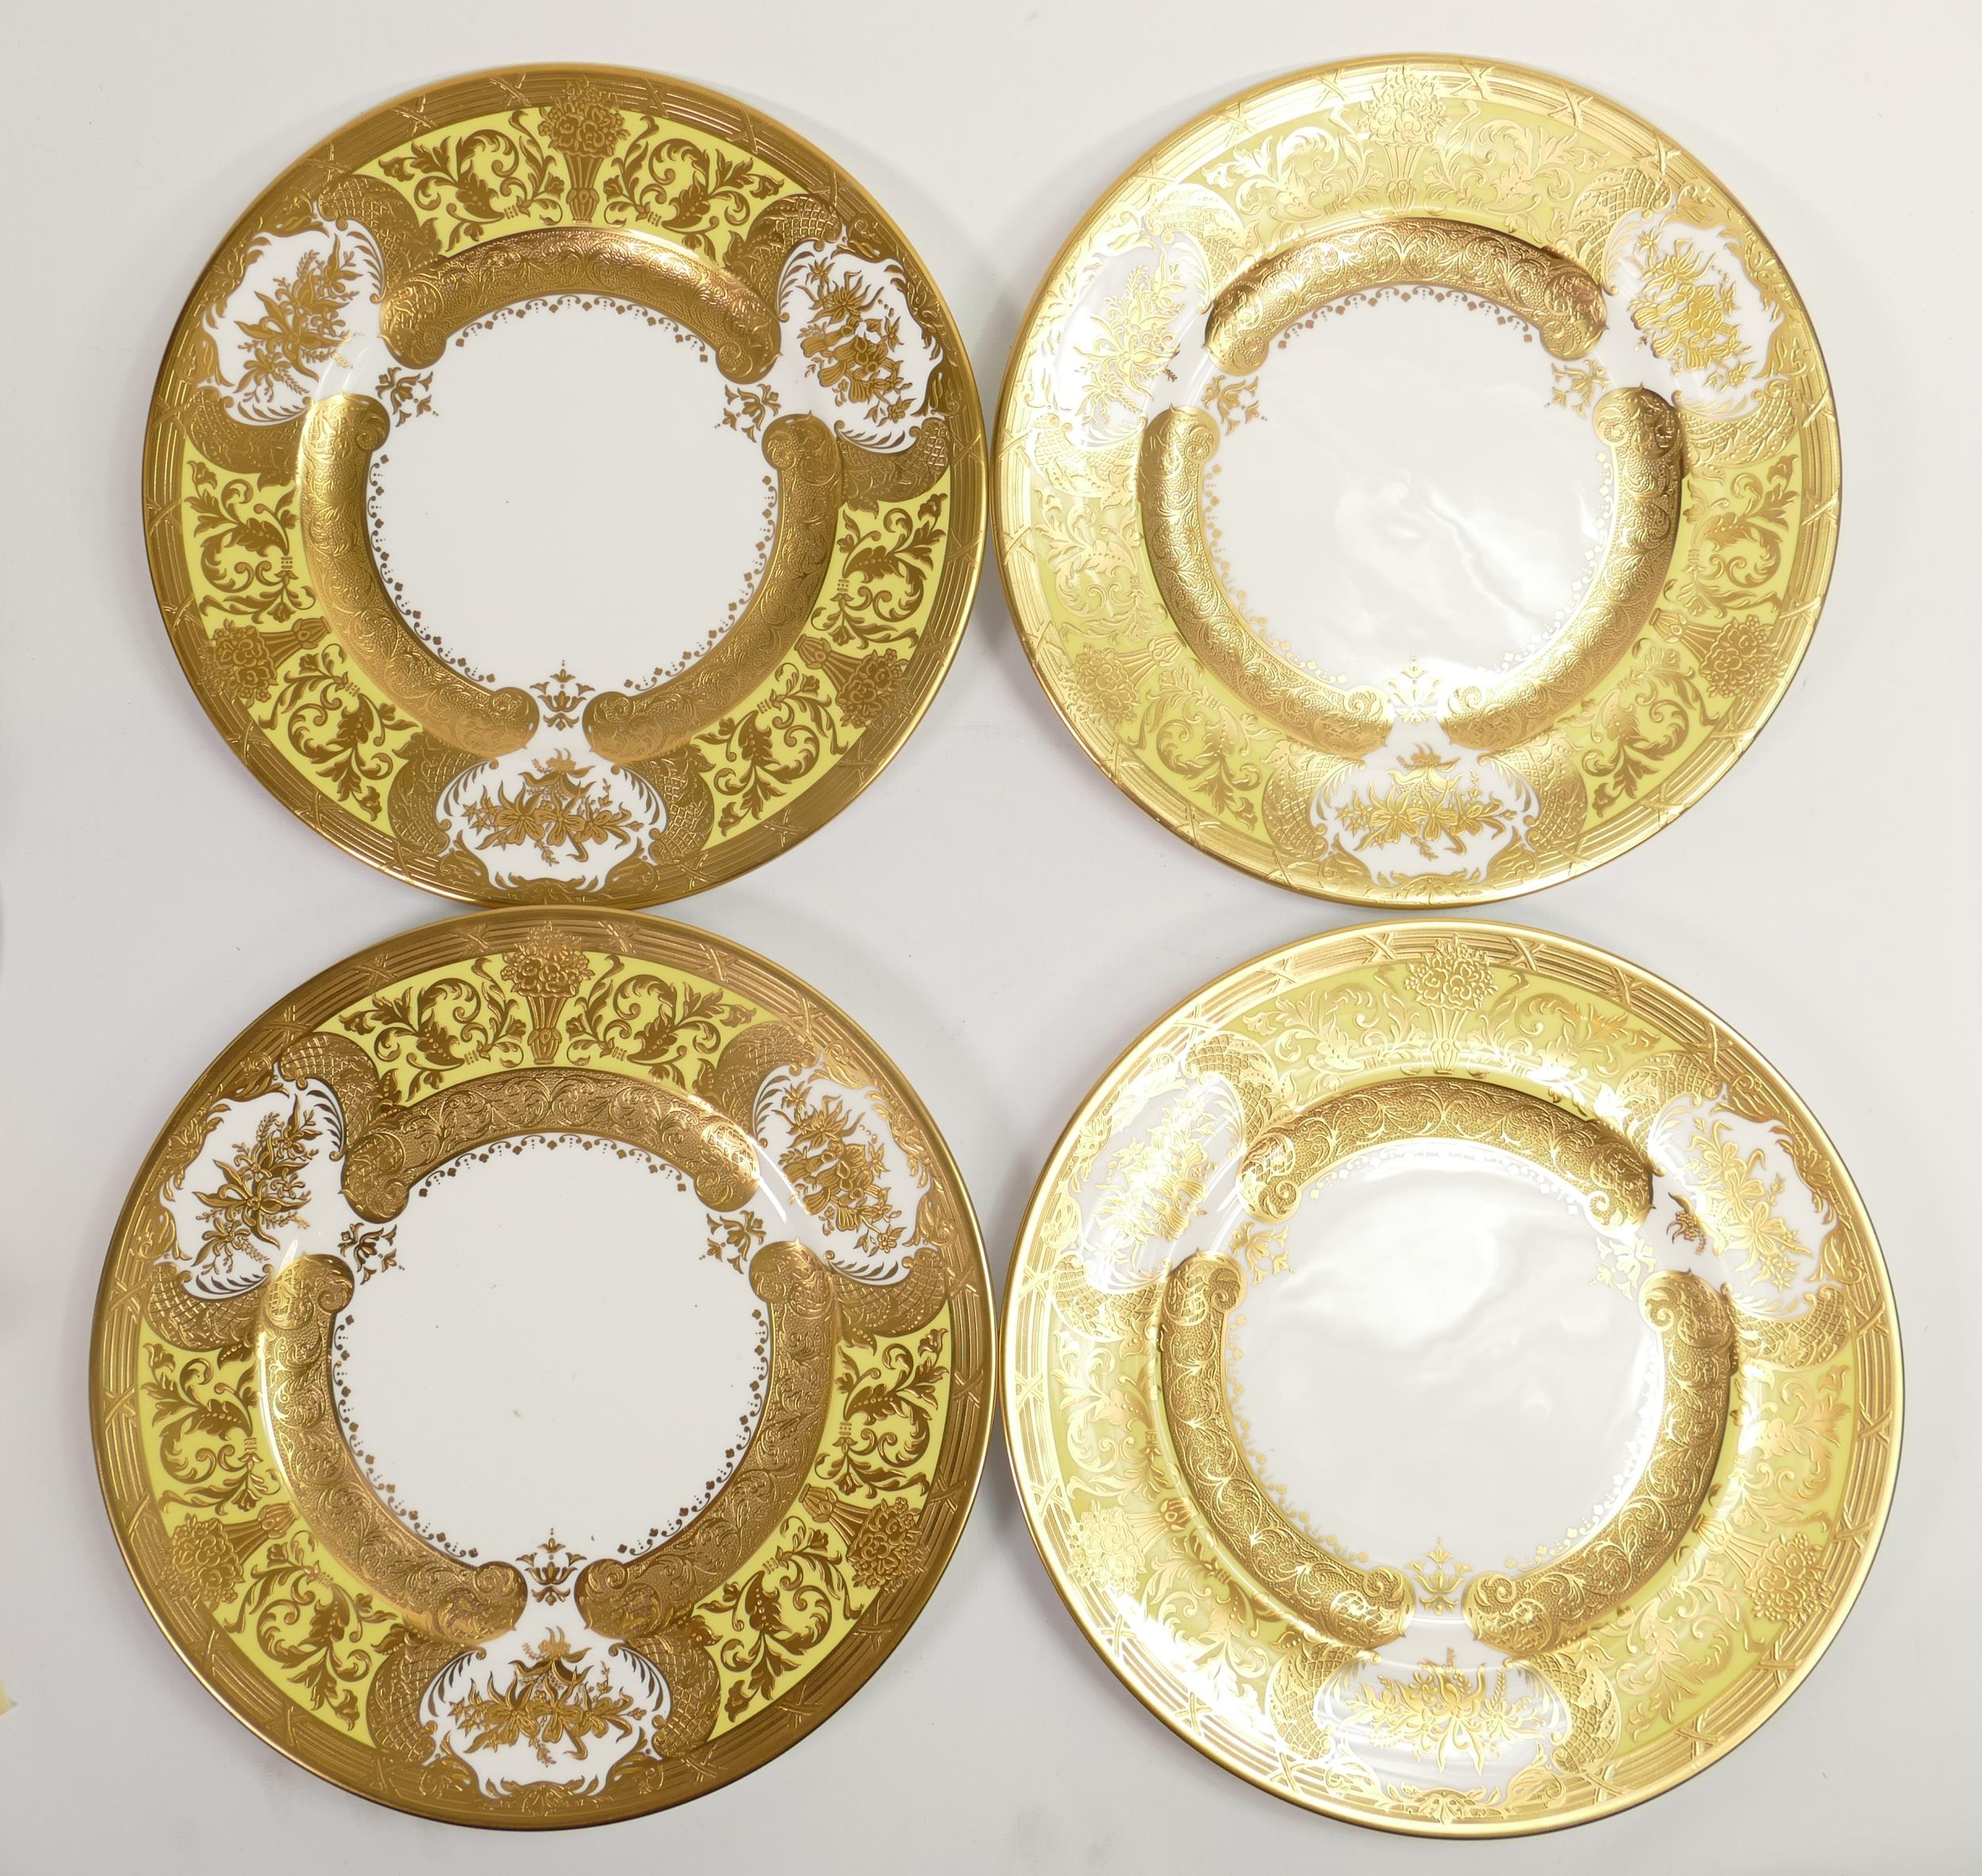 De Lamerie Fine Bone China heavily gilded Majestic patterned dinner plates, specially made high